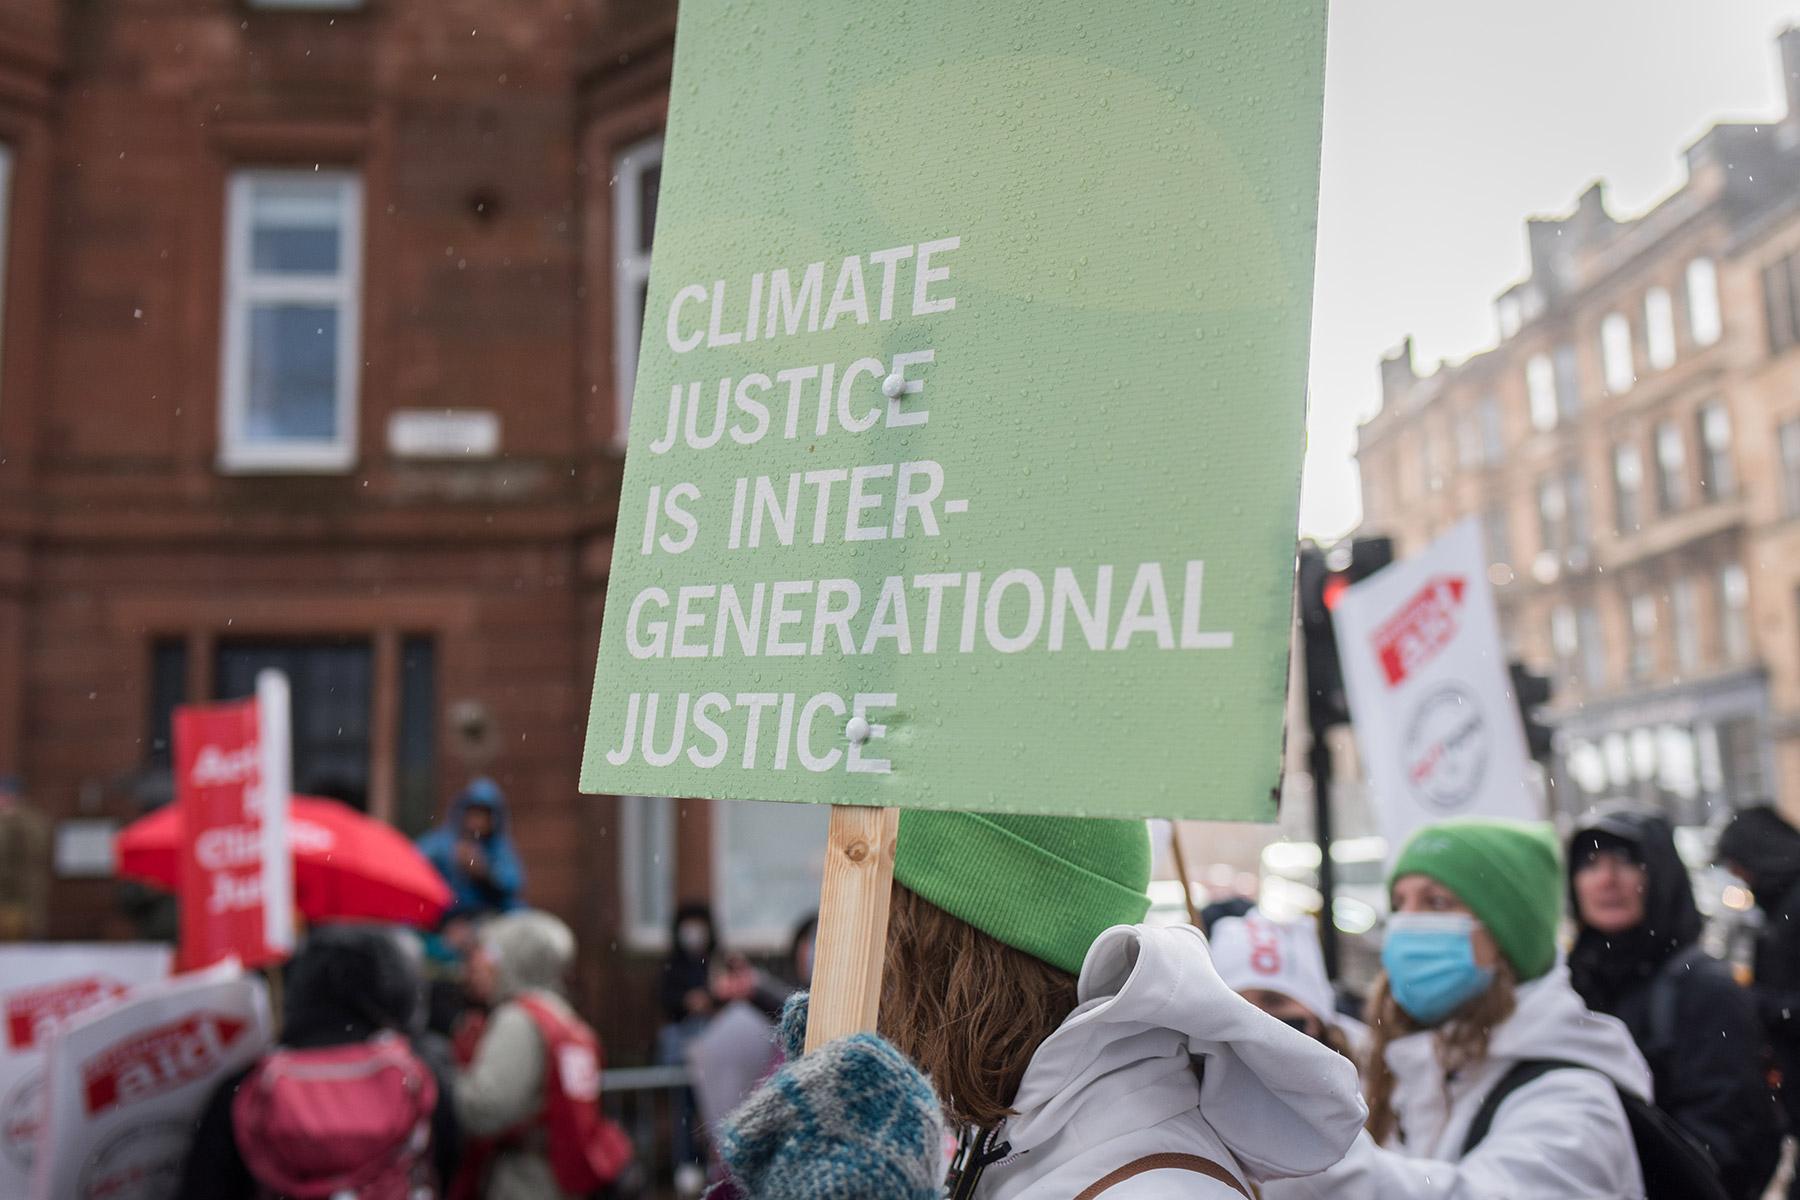 During the UN climate conference COP26, LWF delegates joined a climate march. One banner read âClimate justice is intergenerational justiceâ. Photo: LWF/Albin Hillert